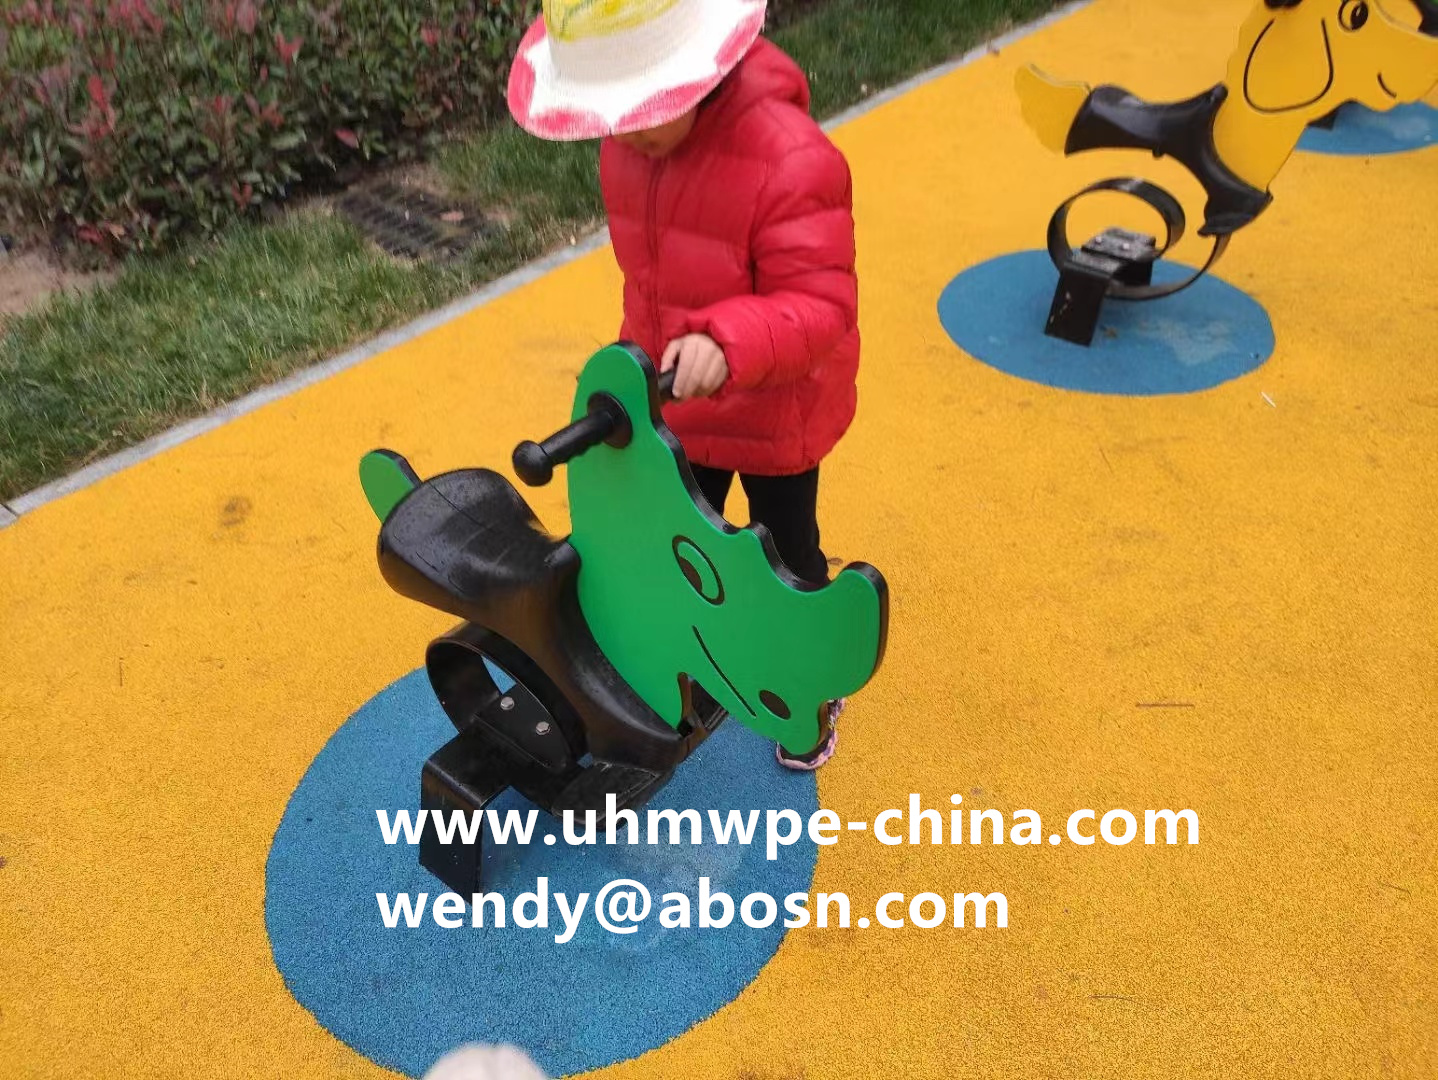 HDPE Dual color sheet for children playground (6).jpg